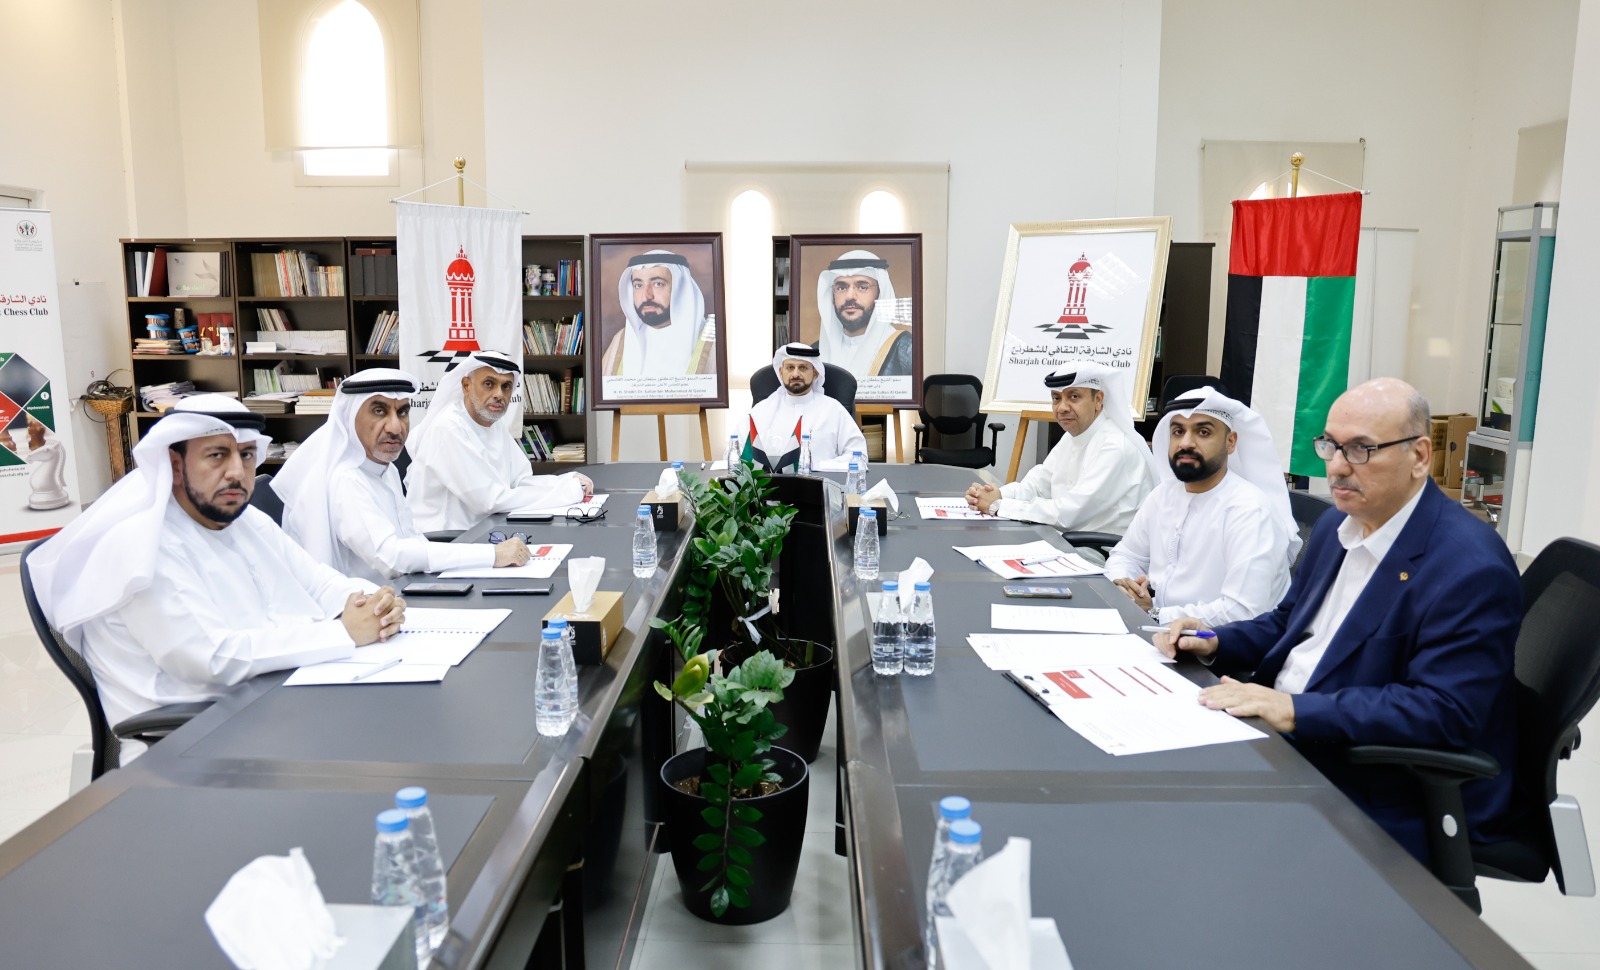 “Sharjah Chess” distributes administrative positions